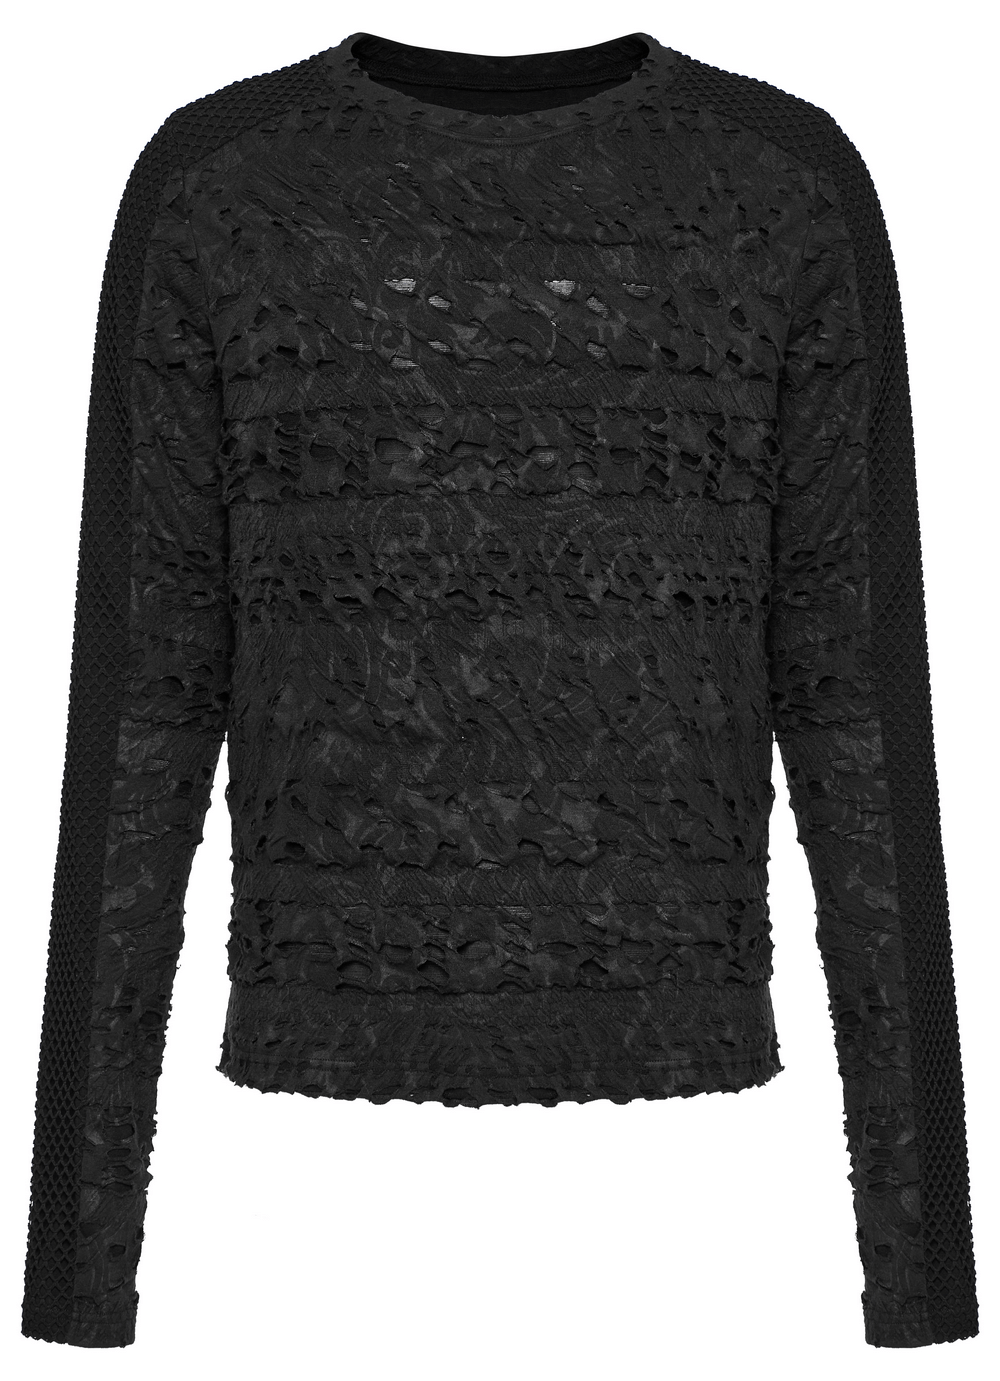 Gothic Men's Decadent Long Sleeves Top With Mesh - HARD'N'HEAVY